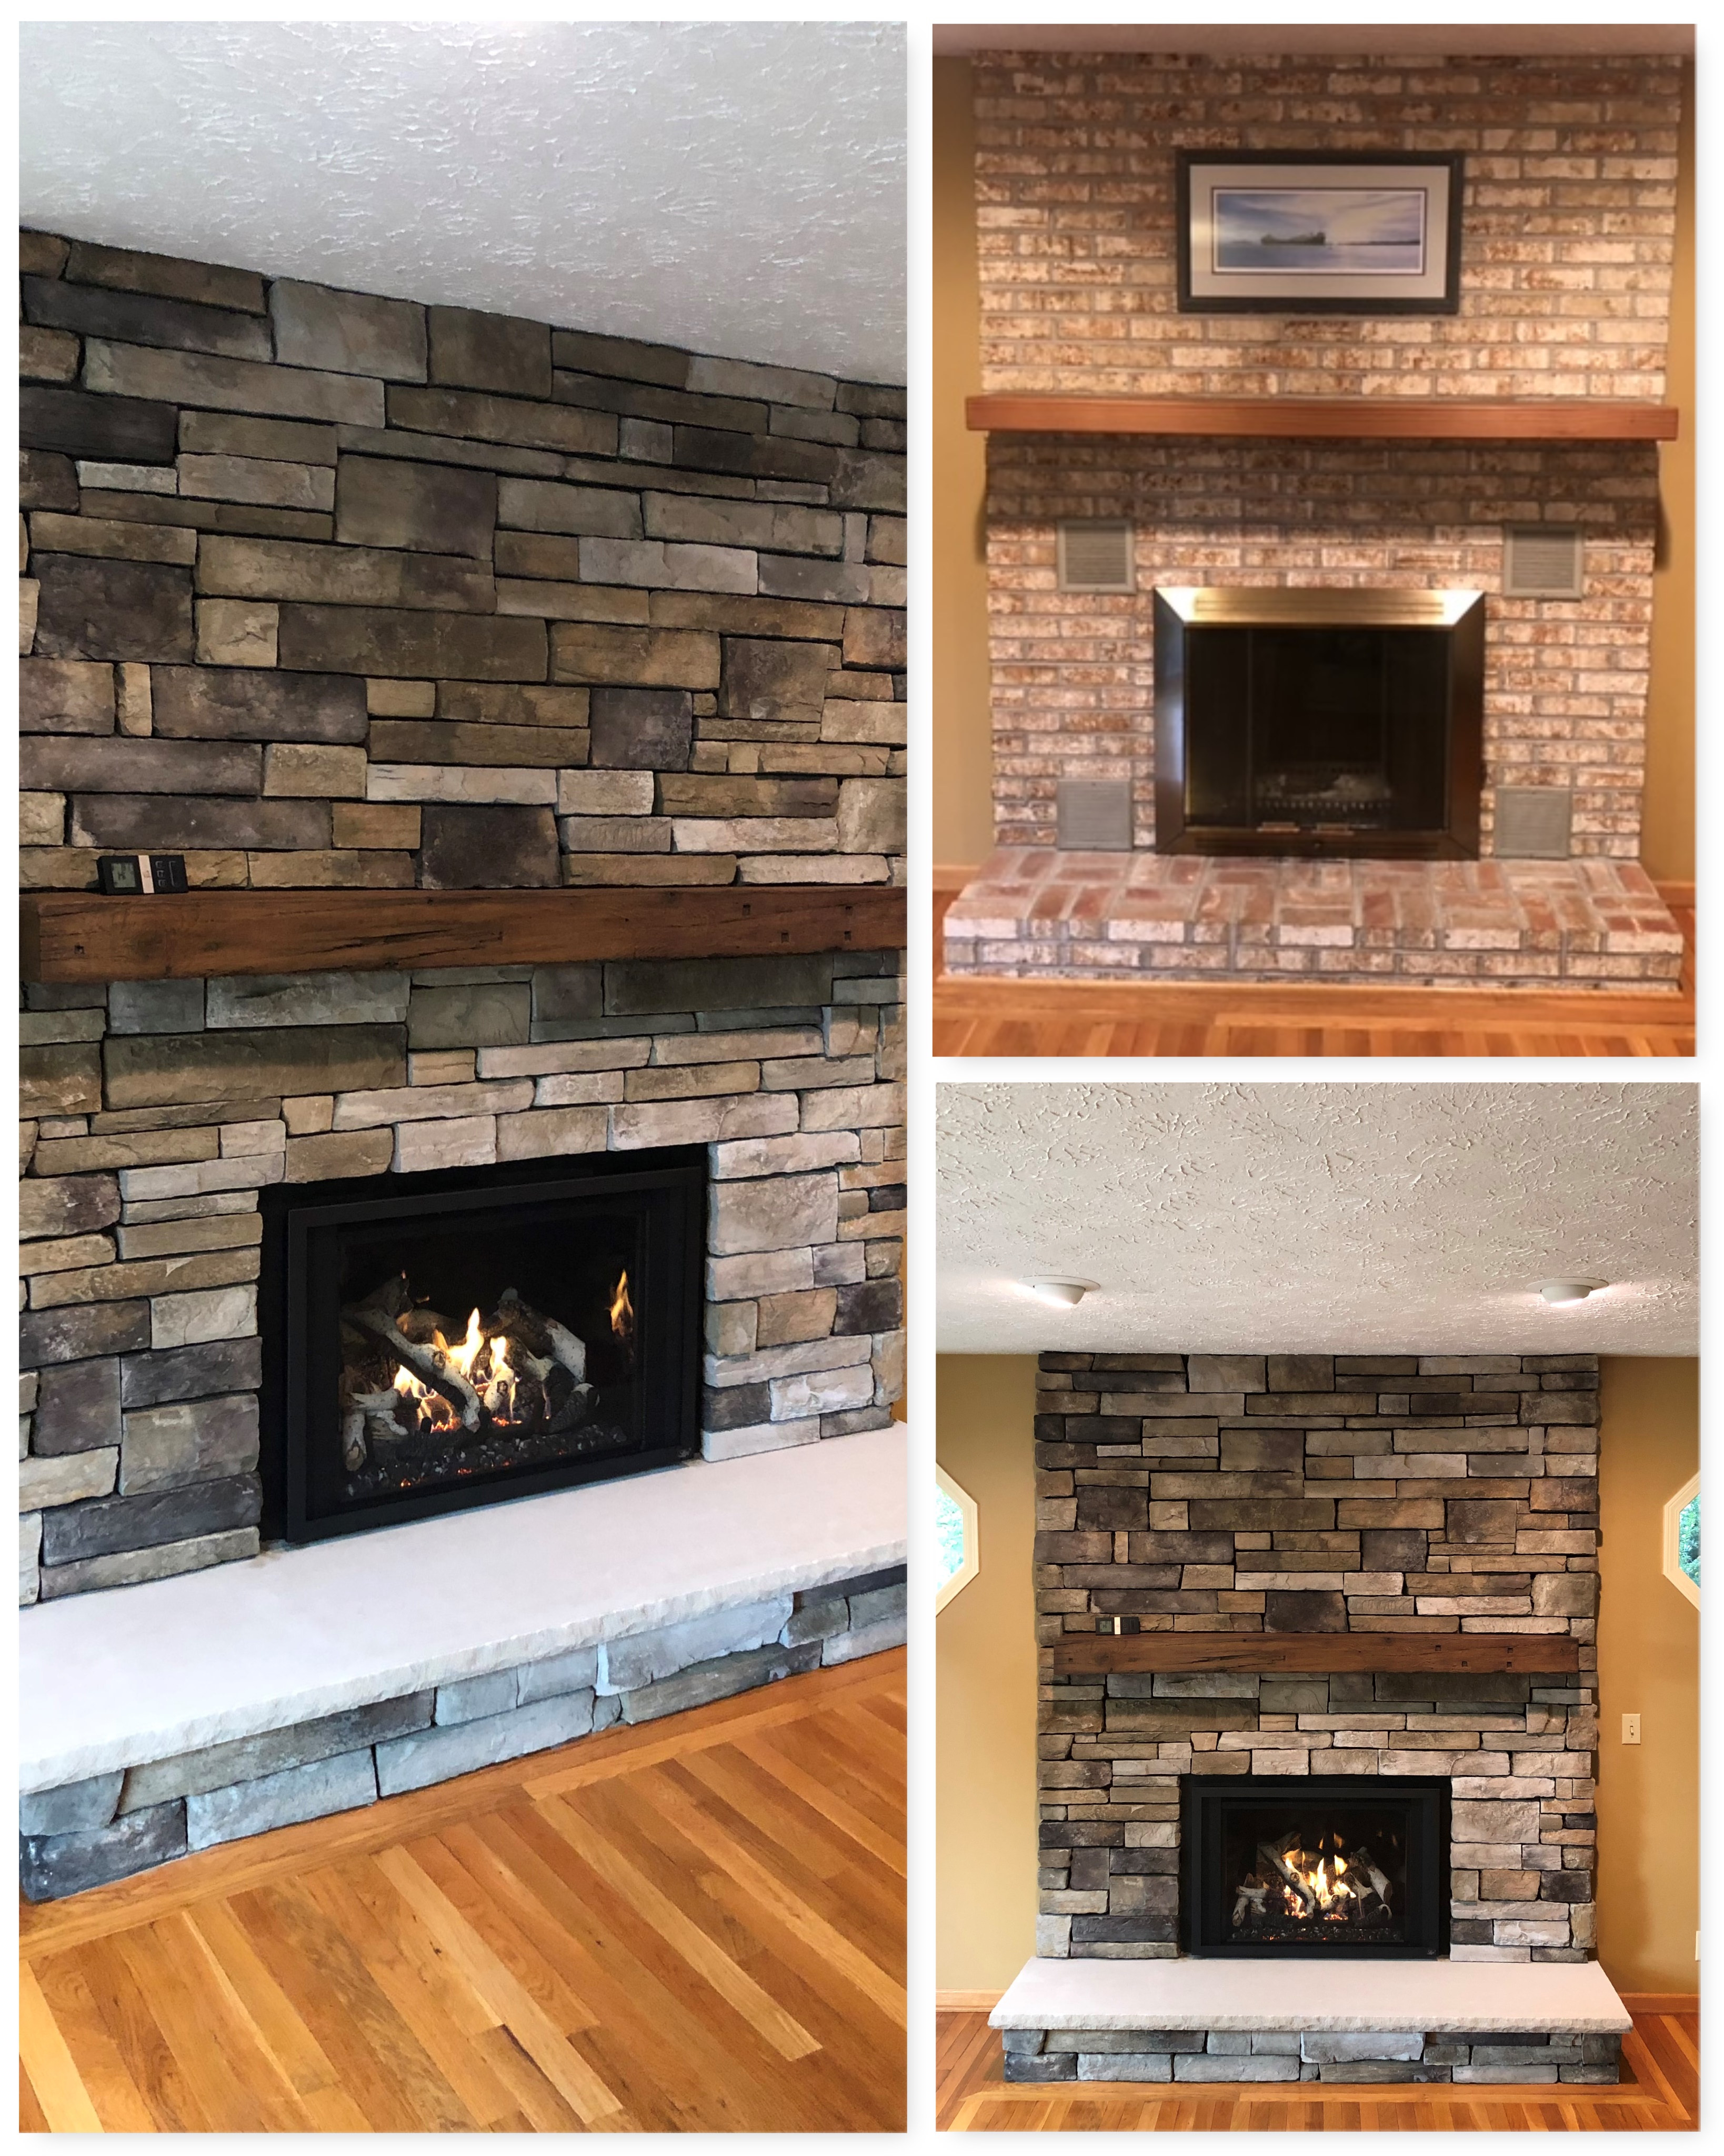 Image of a 616 by Fireplace Xtordinair with rustic Cultured Stonework and MagraHearth Mantle.